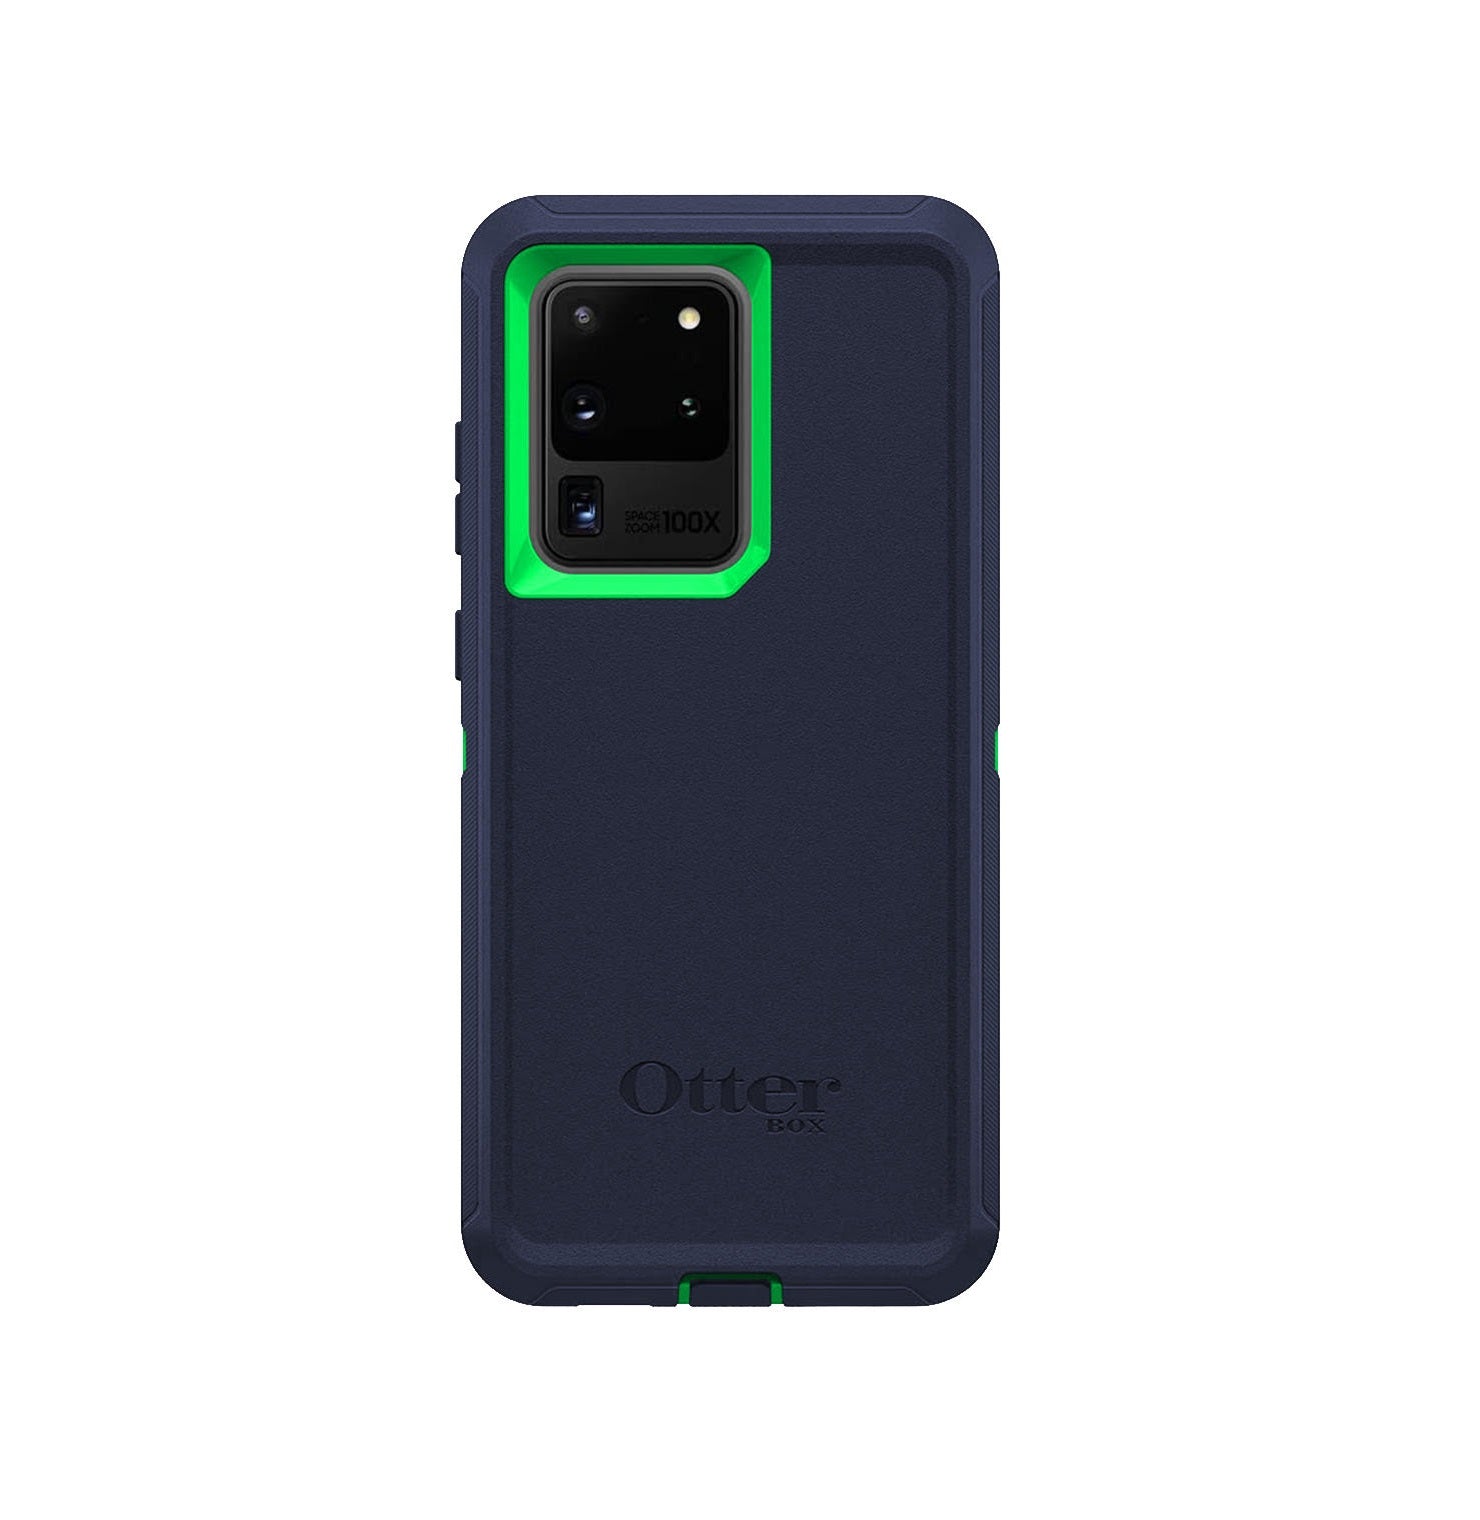 https://caserace.net/products/otterbox-defender-series-screenless-edition-case-for-samsung-galaxy-s20-ultra-navy-green